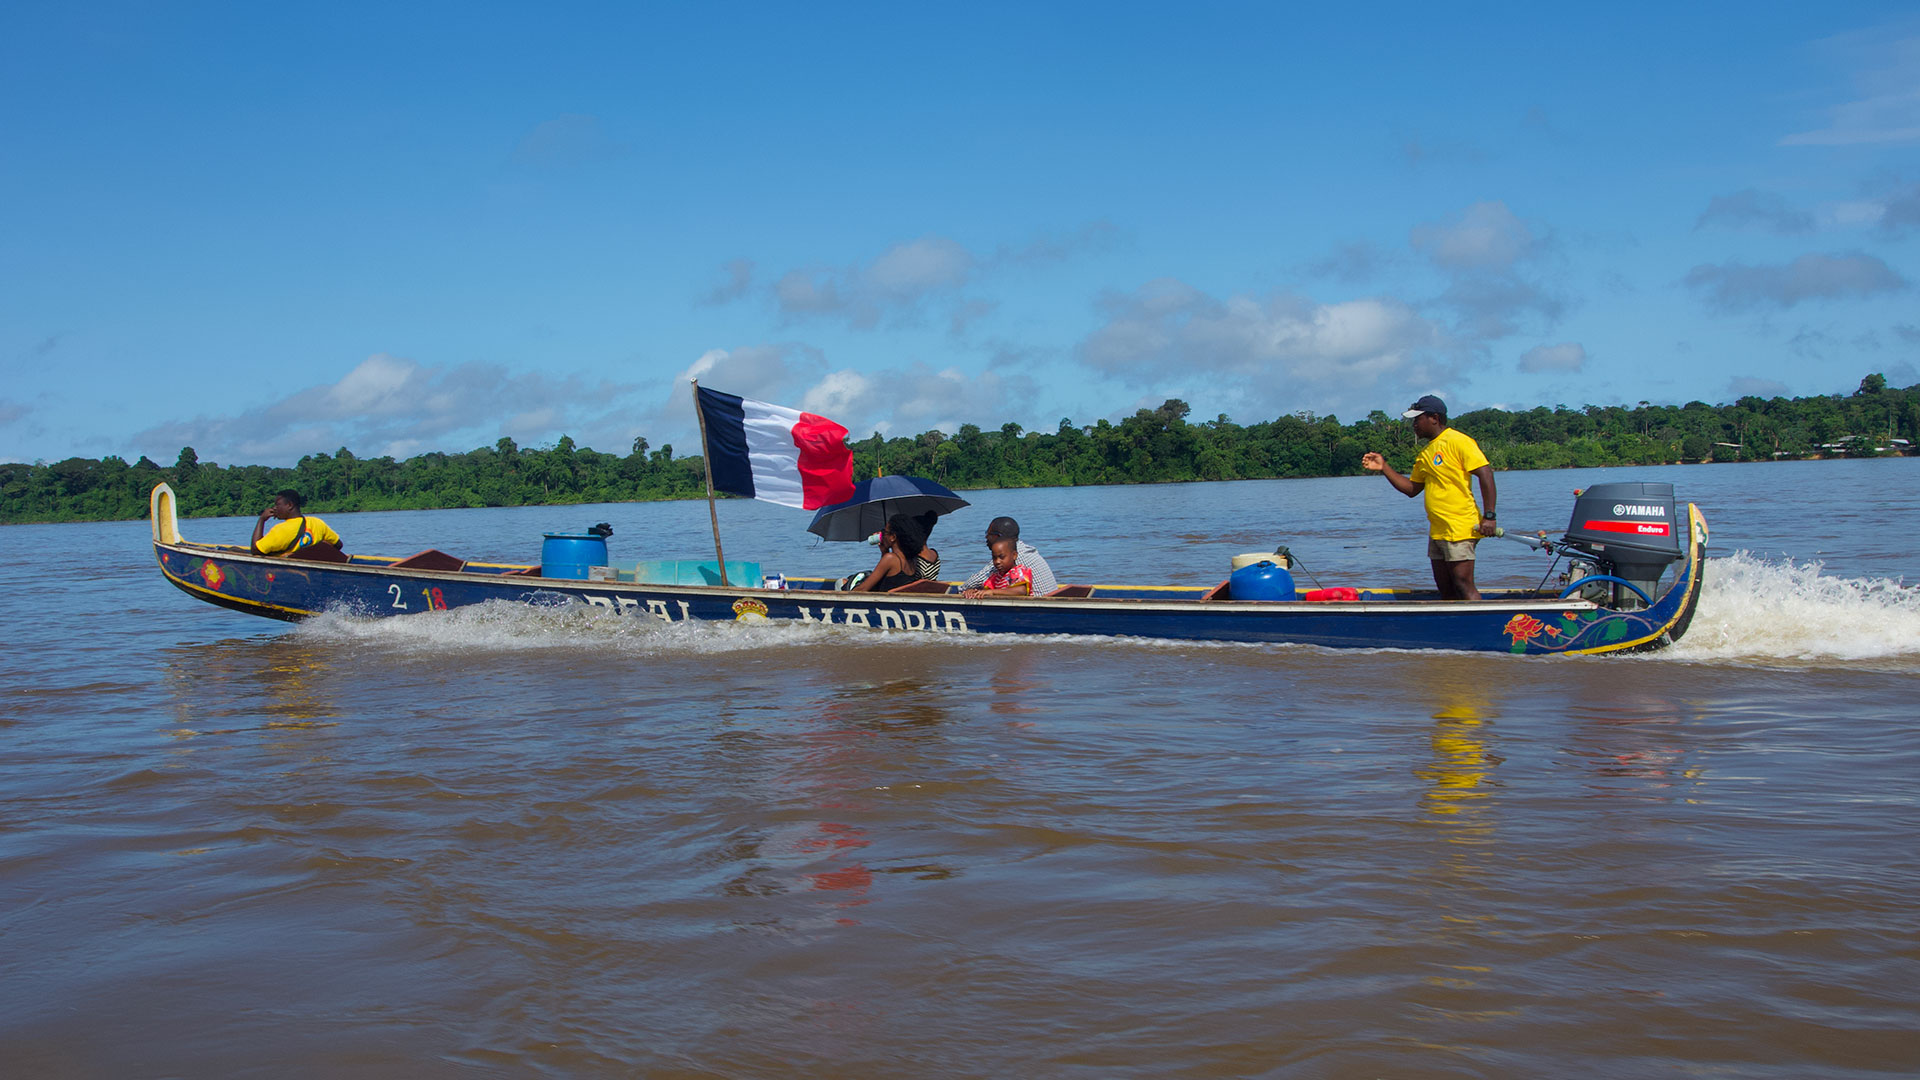 In French Guiana, where only the coastline has road infrastructure, the rivers remain the main means of transporting people and goods.